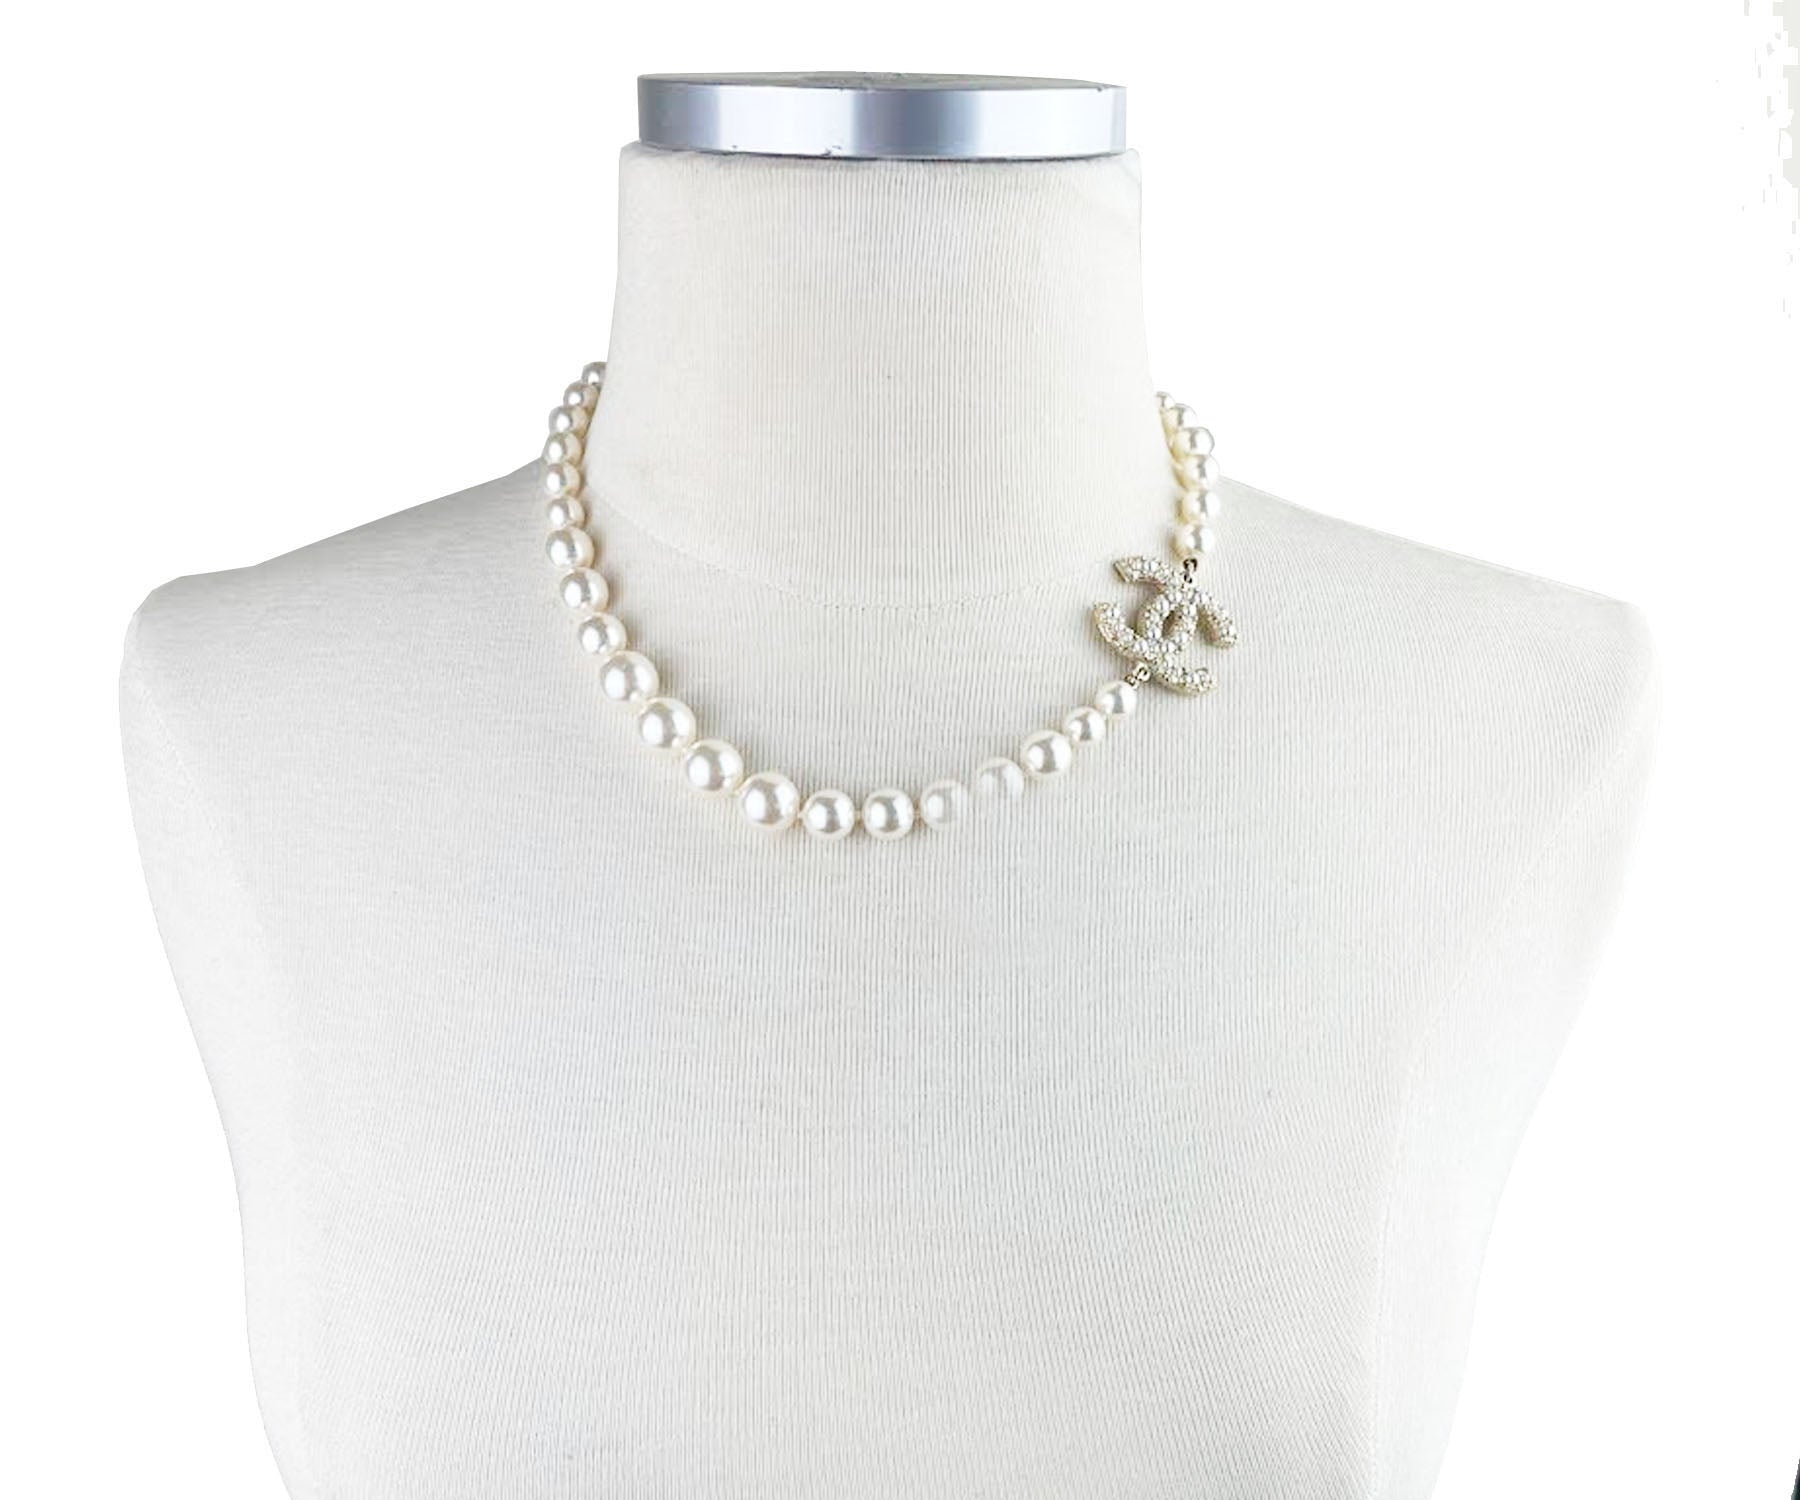 Cc pearls necklace Chanel White in Pearls - 21277208